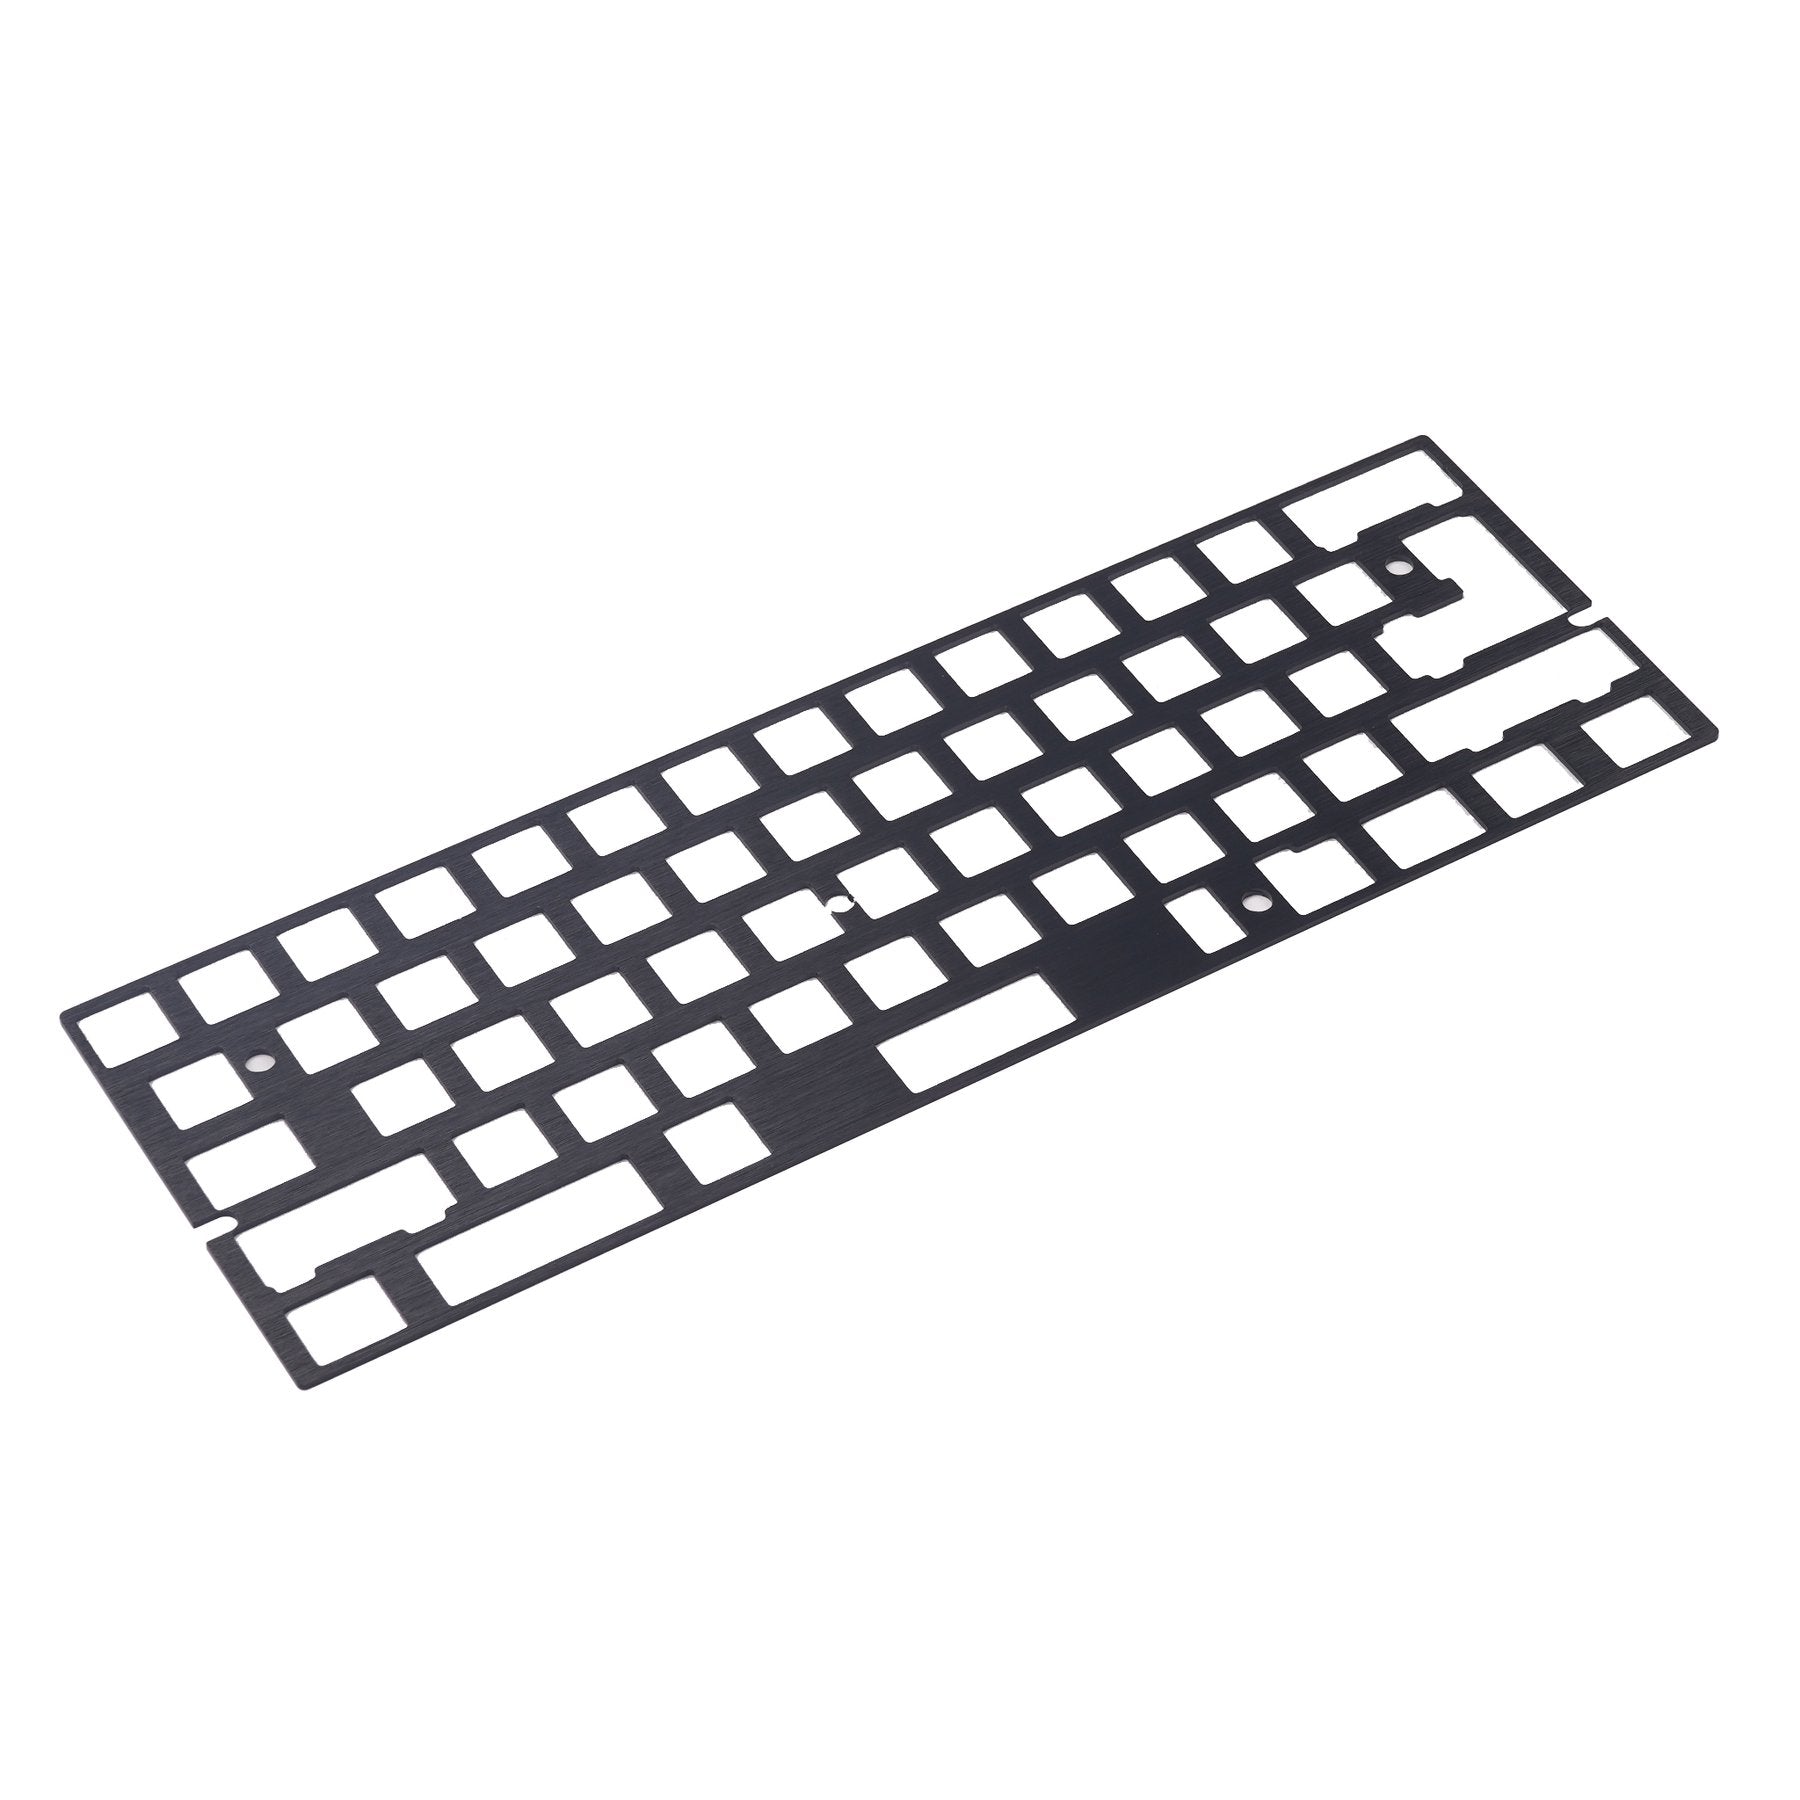 Black universal 60% aluminium keyboard plate that supports most typical 60% layouts.